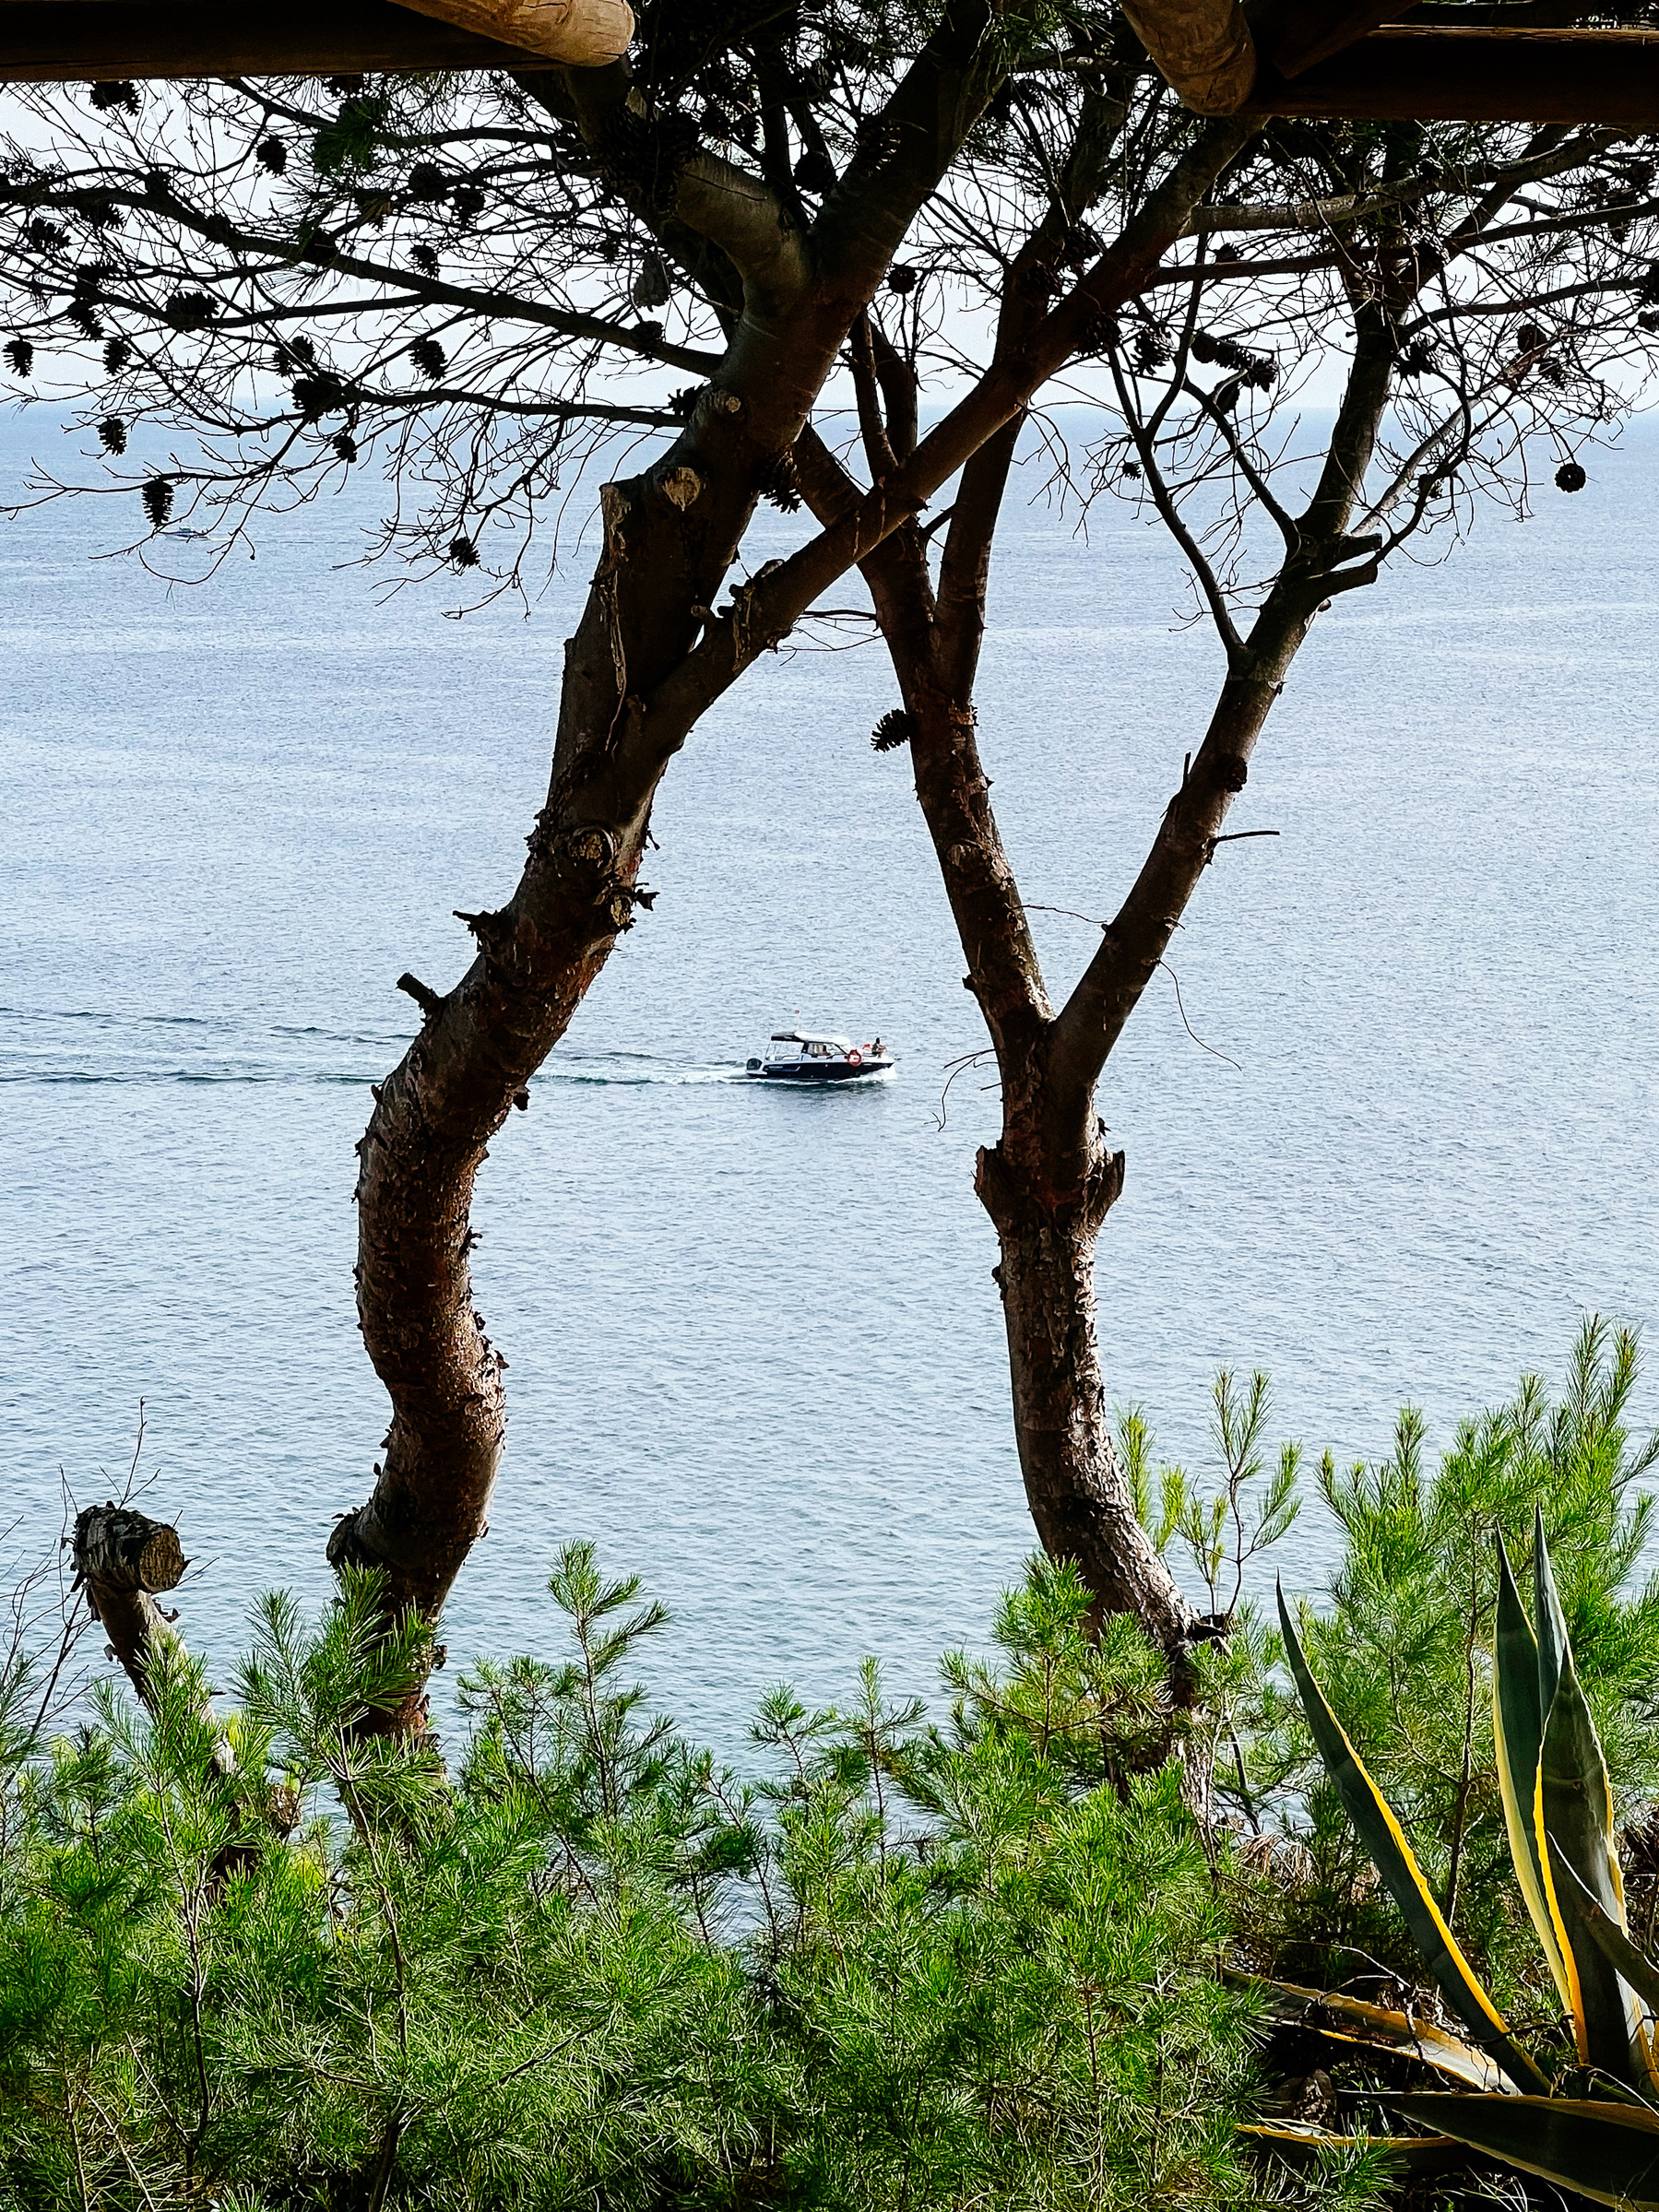 A boat in the sea, viewed from land, with vegetation in the foreground